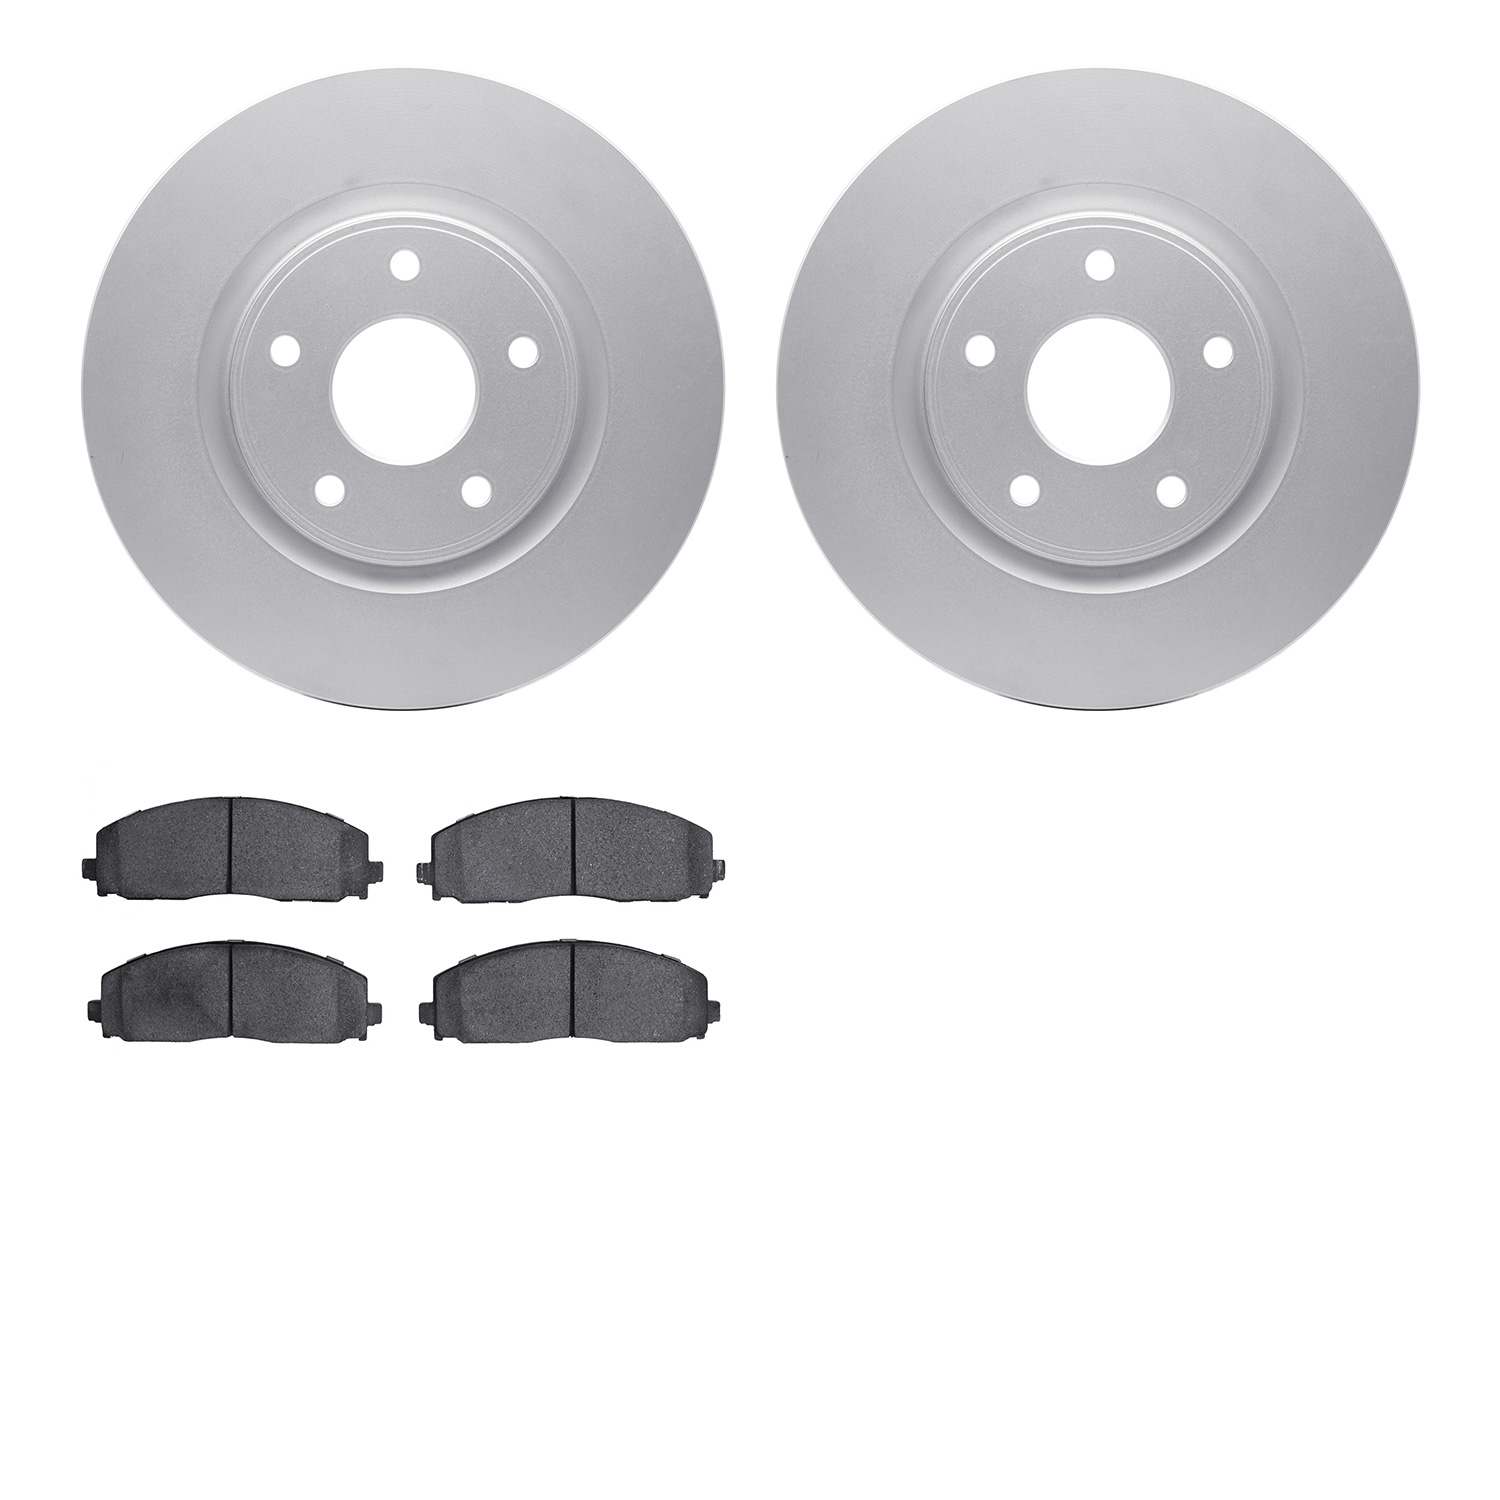 4402-40020 Geospec Brake Rotors with Ultimate-Duty Brake Pads Kit, Fits Select Multiple Makes/Models, Position: Front